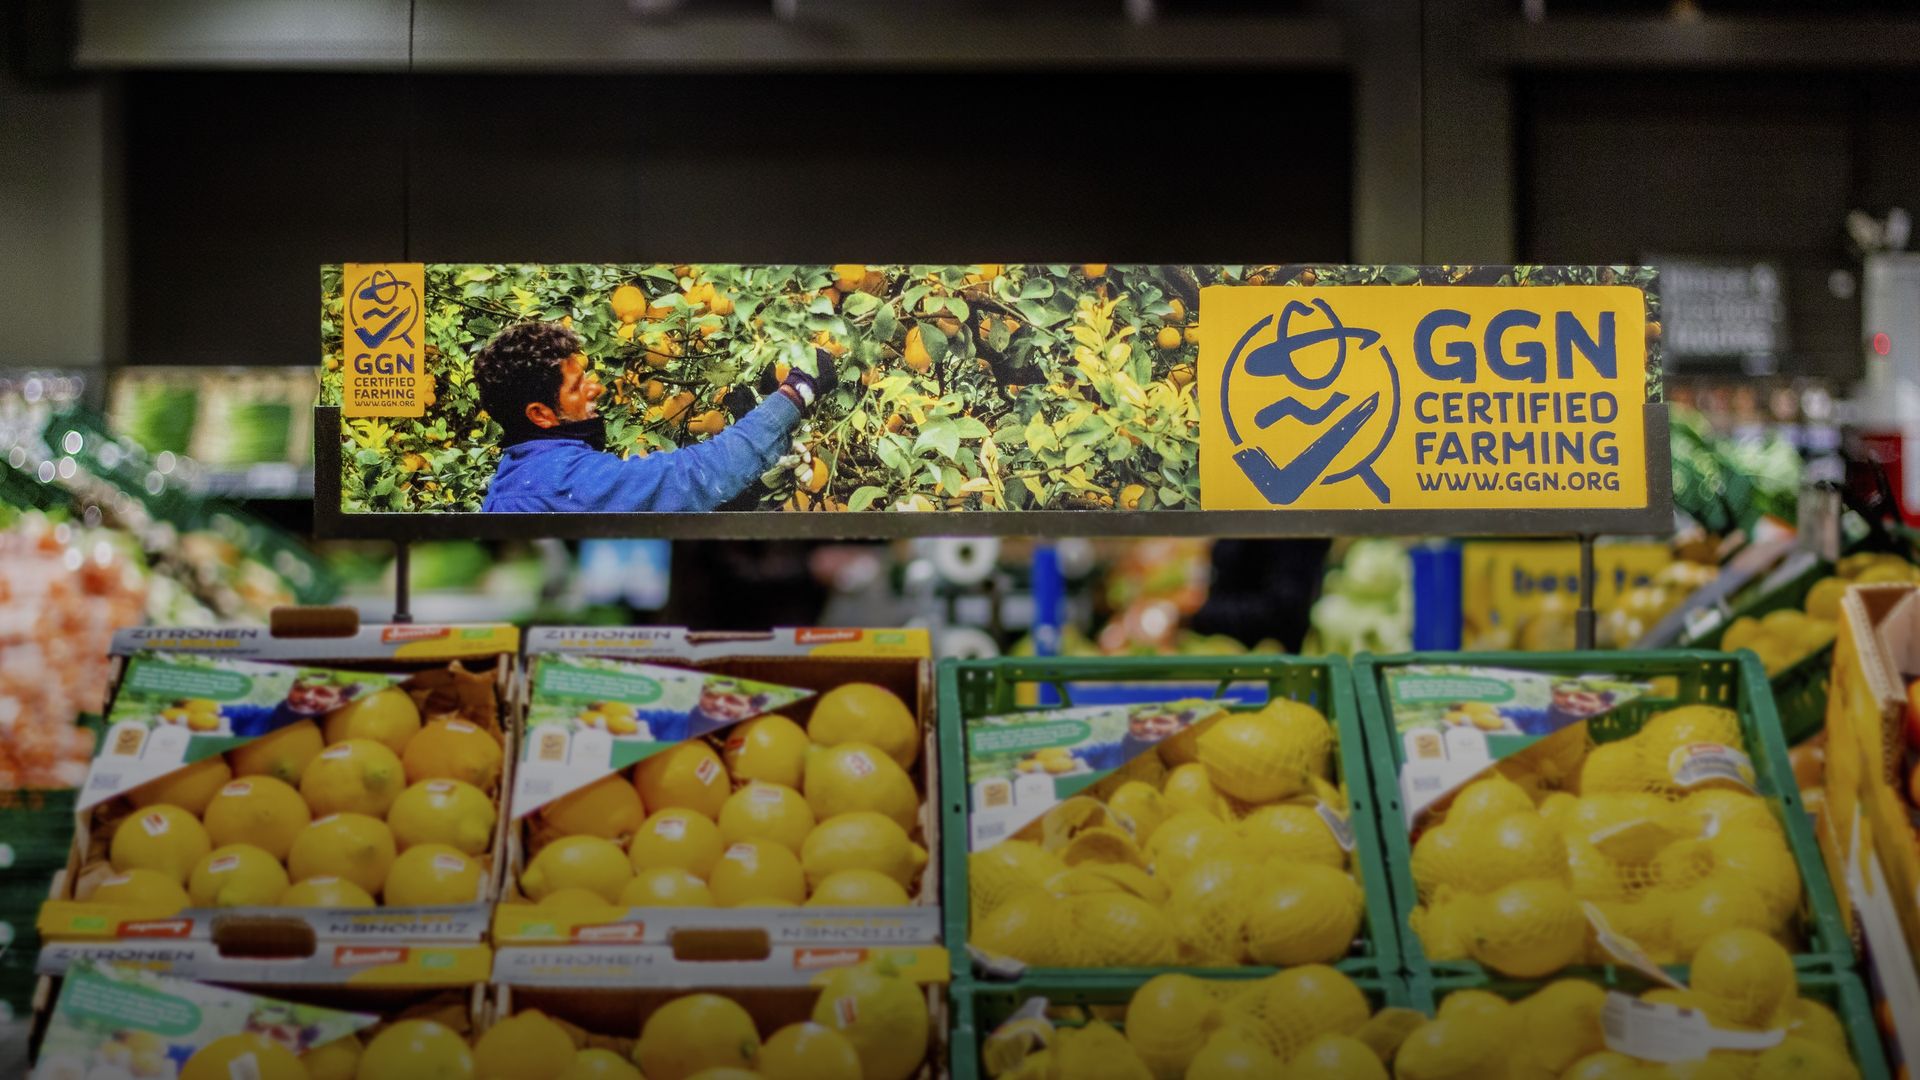 Image of a stand displaying lemons with the GGN label at a GLOBUS store in Germany